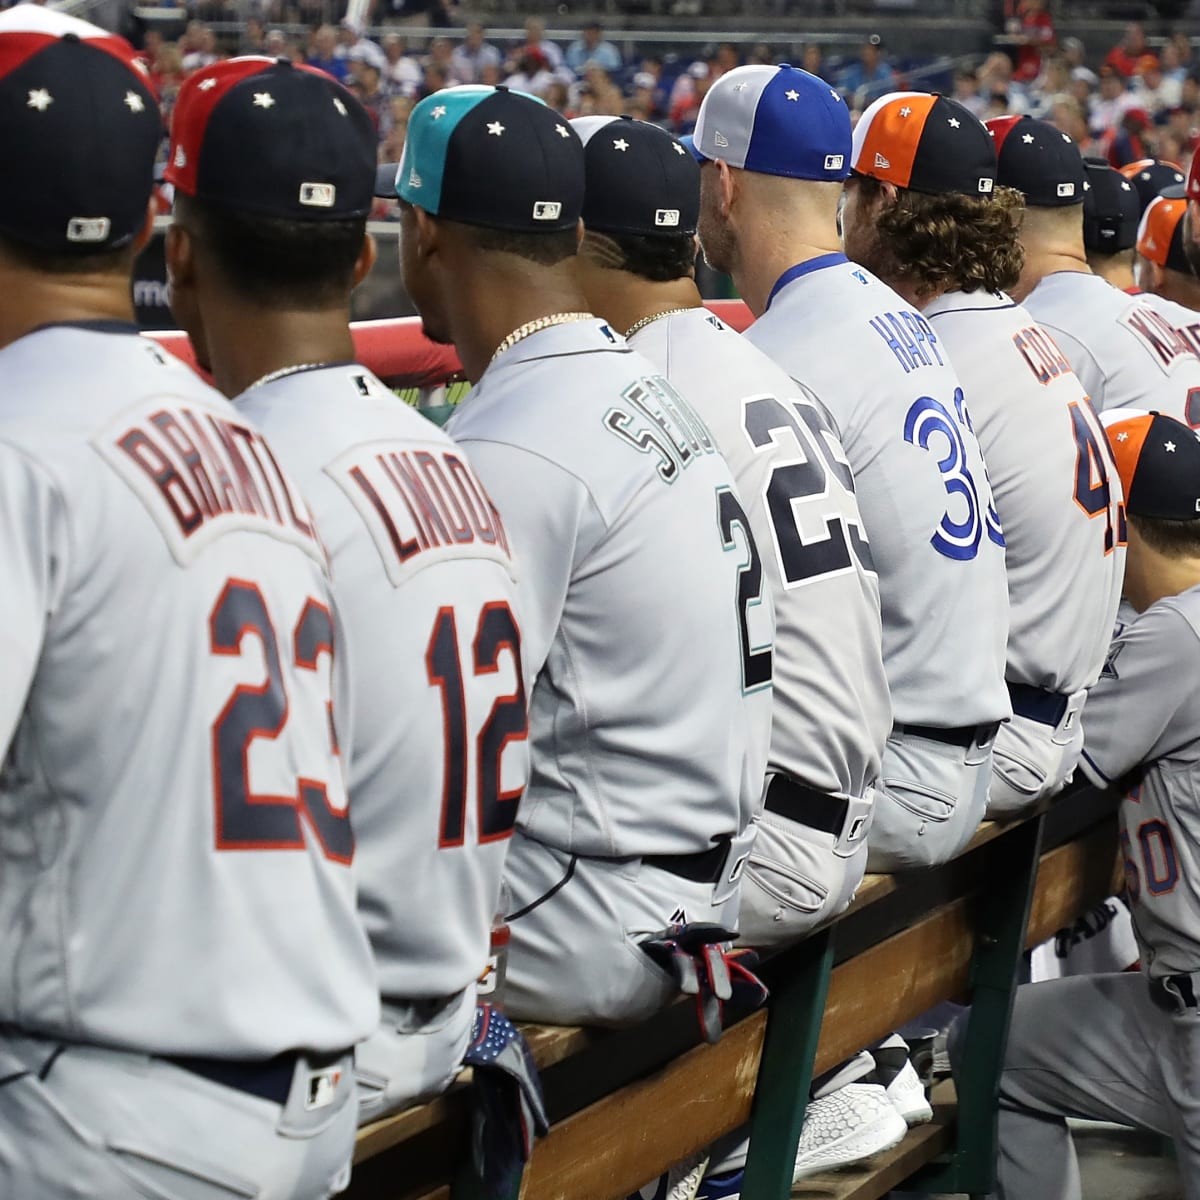 MLB All Star Game: Does every team deserve an All-Star? - Sports Illustrated